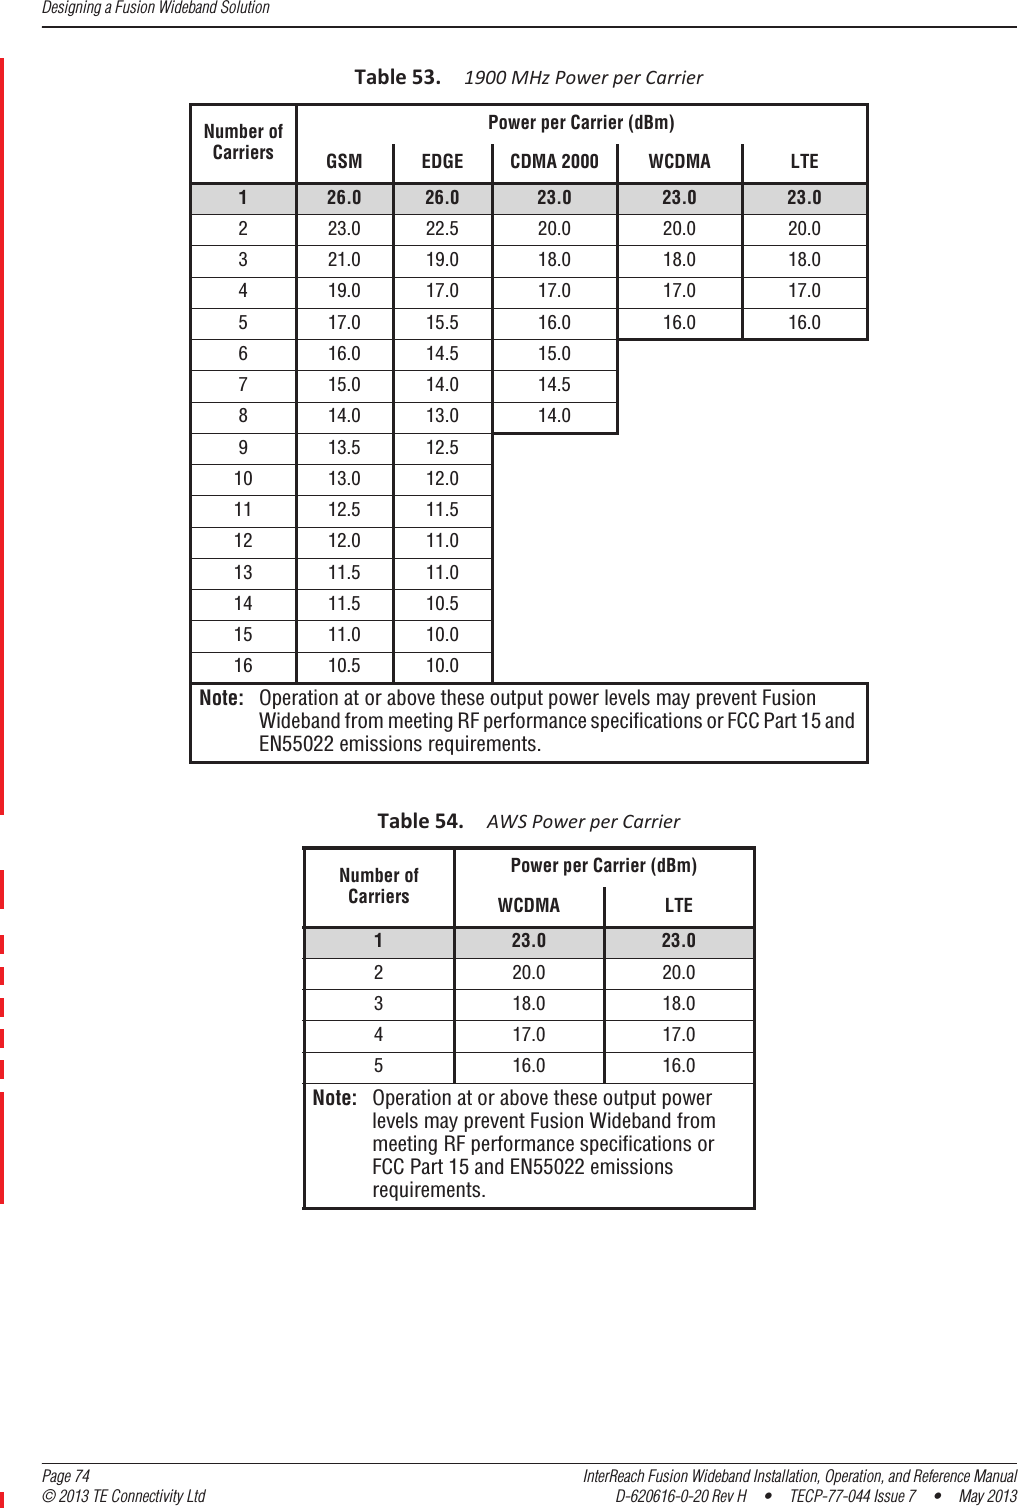 Designing a Fusion Wideband Solution  Page 74 InterReach Fusion Wideband Installation, Operation, and Reference Manual© 2013 TE Connectivity Ltd D-620616-0-20 Rev H  •  TECP-77-044 Issue 7  •  May 2013Table53.1900MHzPowerperCarrierNumber ofCarriersPower per Carrier (dBm)GSM EDGE CDMA 2000 WCDMA LTE1 26.0 26.0 23.0 23.0 23.02 23.0 22.5 20.0 20.0 20.03 21.0 19.0 18.0 18.0 18.04 19.0 17.0 17.0 17.0 17.05 17.0 15.5 16.0 16.0 16.06 16.0 14.5 15.07 15.0 14.0 14.58 14.0 13.0 14.09 13.5 12.510 13.0 12.011 12.5 11.512 12.0 11.013 11.5 11.014 11.5 10.515 11.0 10.016 10.5 10.0Note: Operation at or above these output power levels may prevent Fusion Wideband from meeting RF performance specifications or FCC Part 15 and EN55022 emissions requirements. Table54.AWSPowerperCarrierNumber of CarriersPower per Carrier (dBm)WCDMA LTE1 23.0 23.02 20.0 20.03 18.0 18.04 17.0 17.05 16.0 16.0Note: Operation at or above these output power levels may prevent Fusion Wideband from meeting RF performance specifications or FCC Part 15 and EN55022 emissions requirements. 